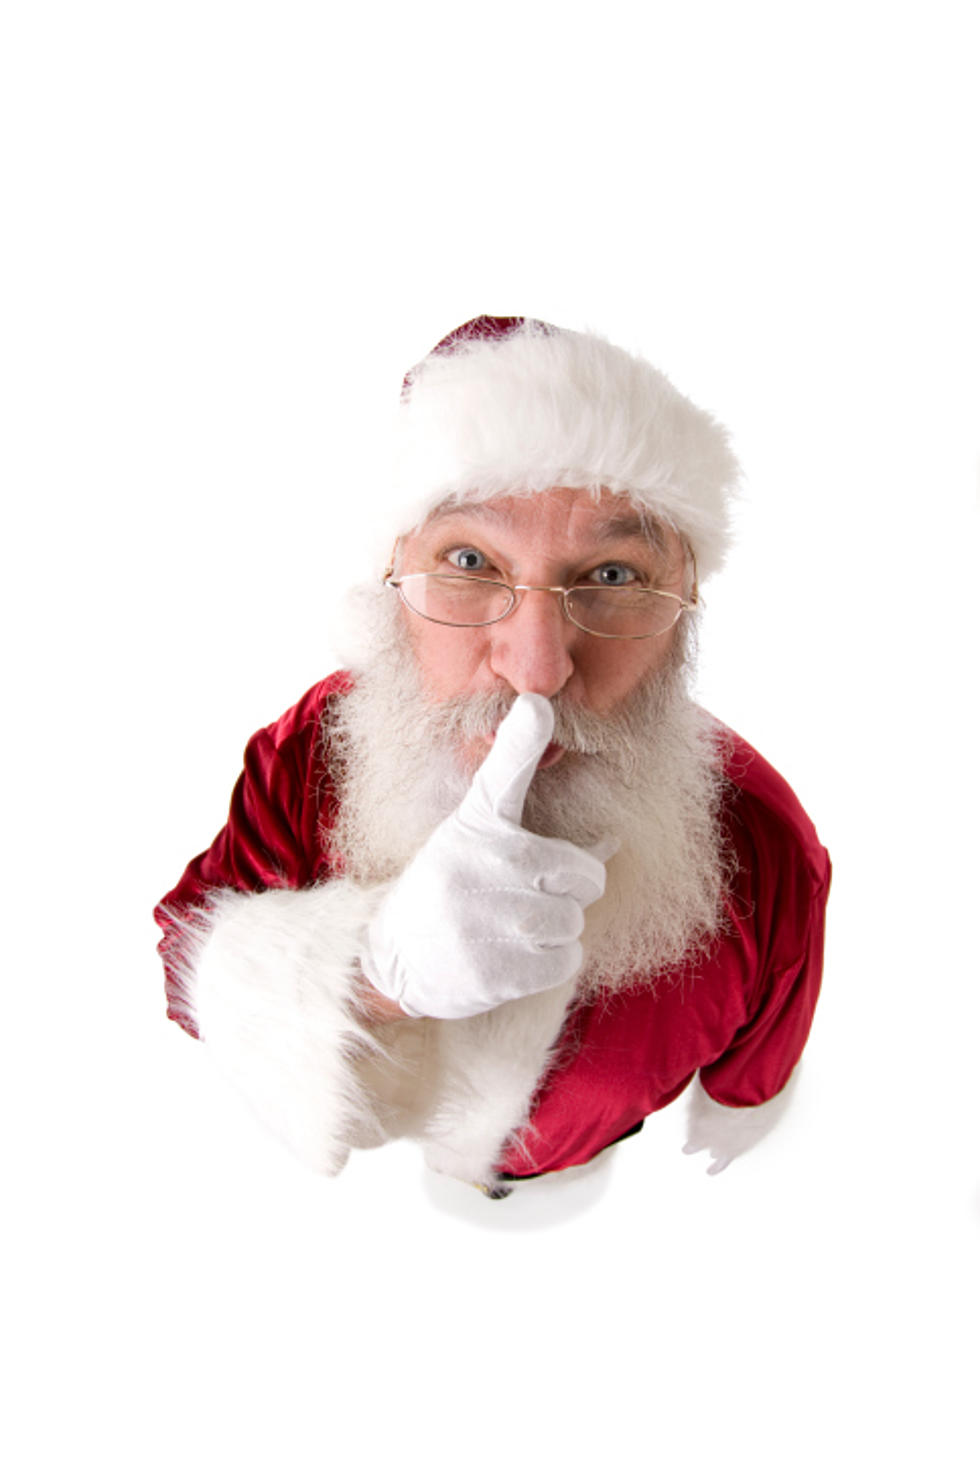 No Foul Smells Allowed on Christmas and Other Odd TX Holiday Laws